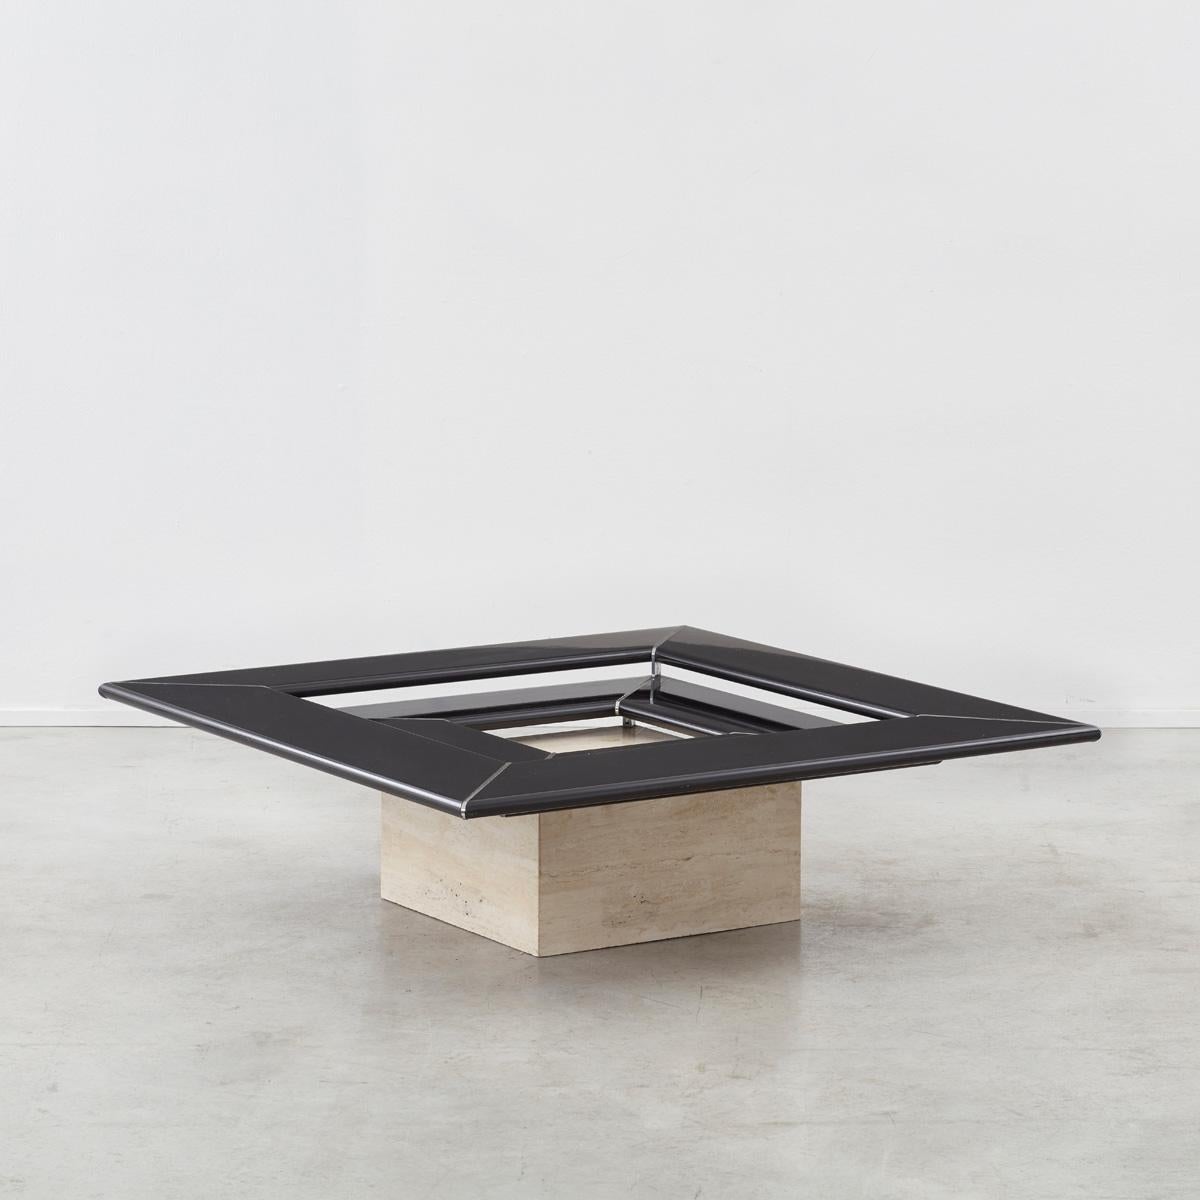 Paolo Piva (1950-2017) was an Italian architect and designer whose interest in social housing influenced a career in making minimalist, elegant and functional buildings and furniture. In his “Re Quadro” coffee table, negative space counts as much as